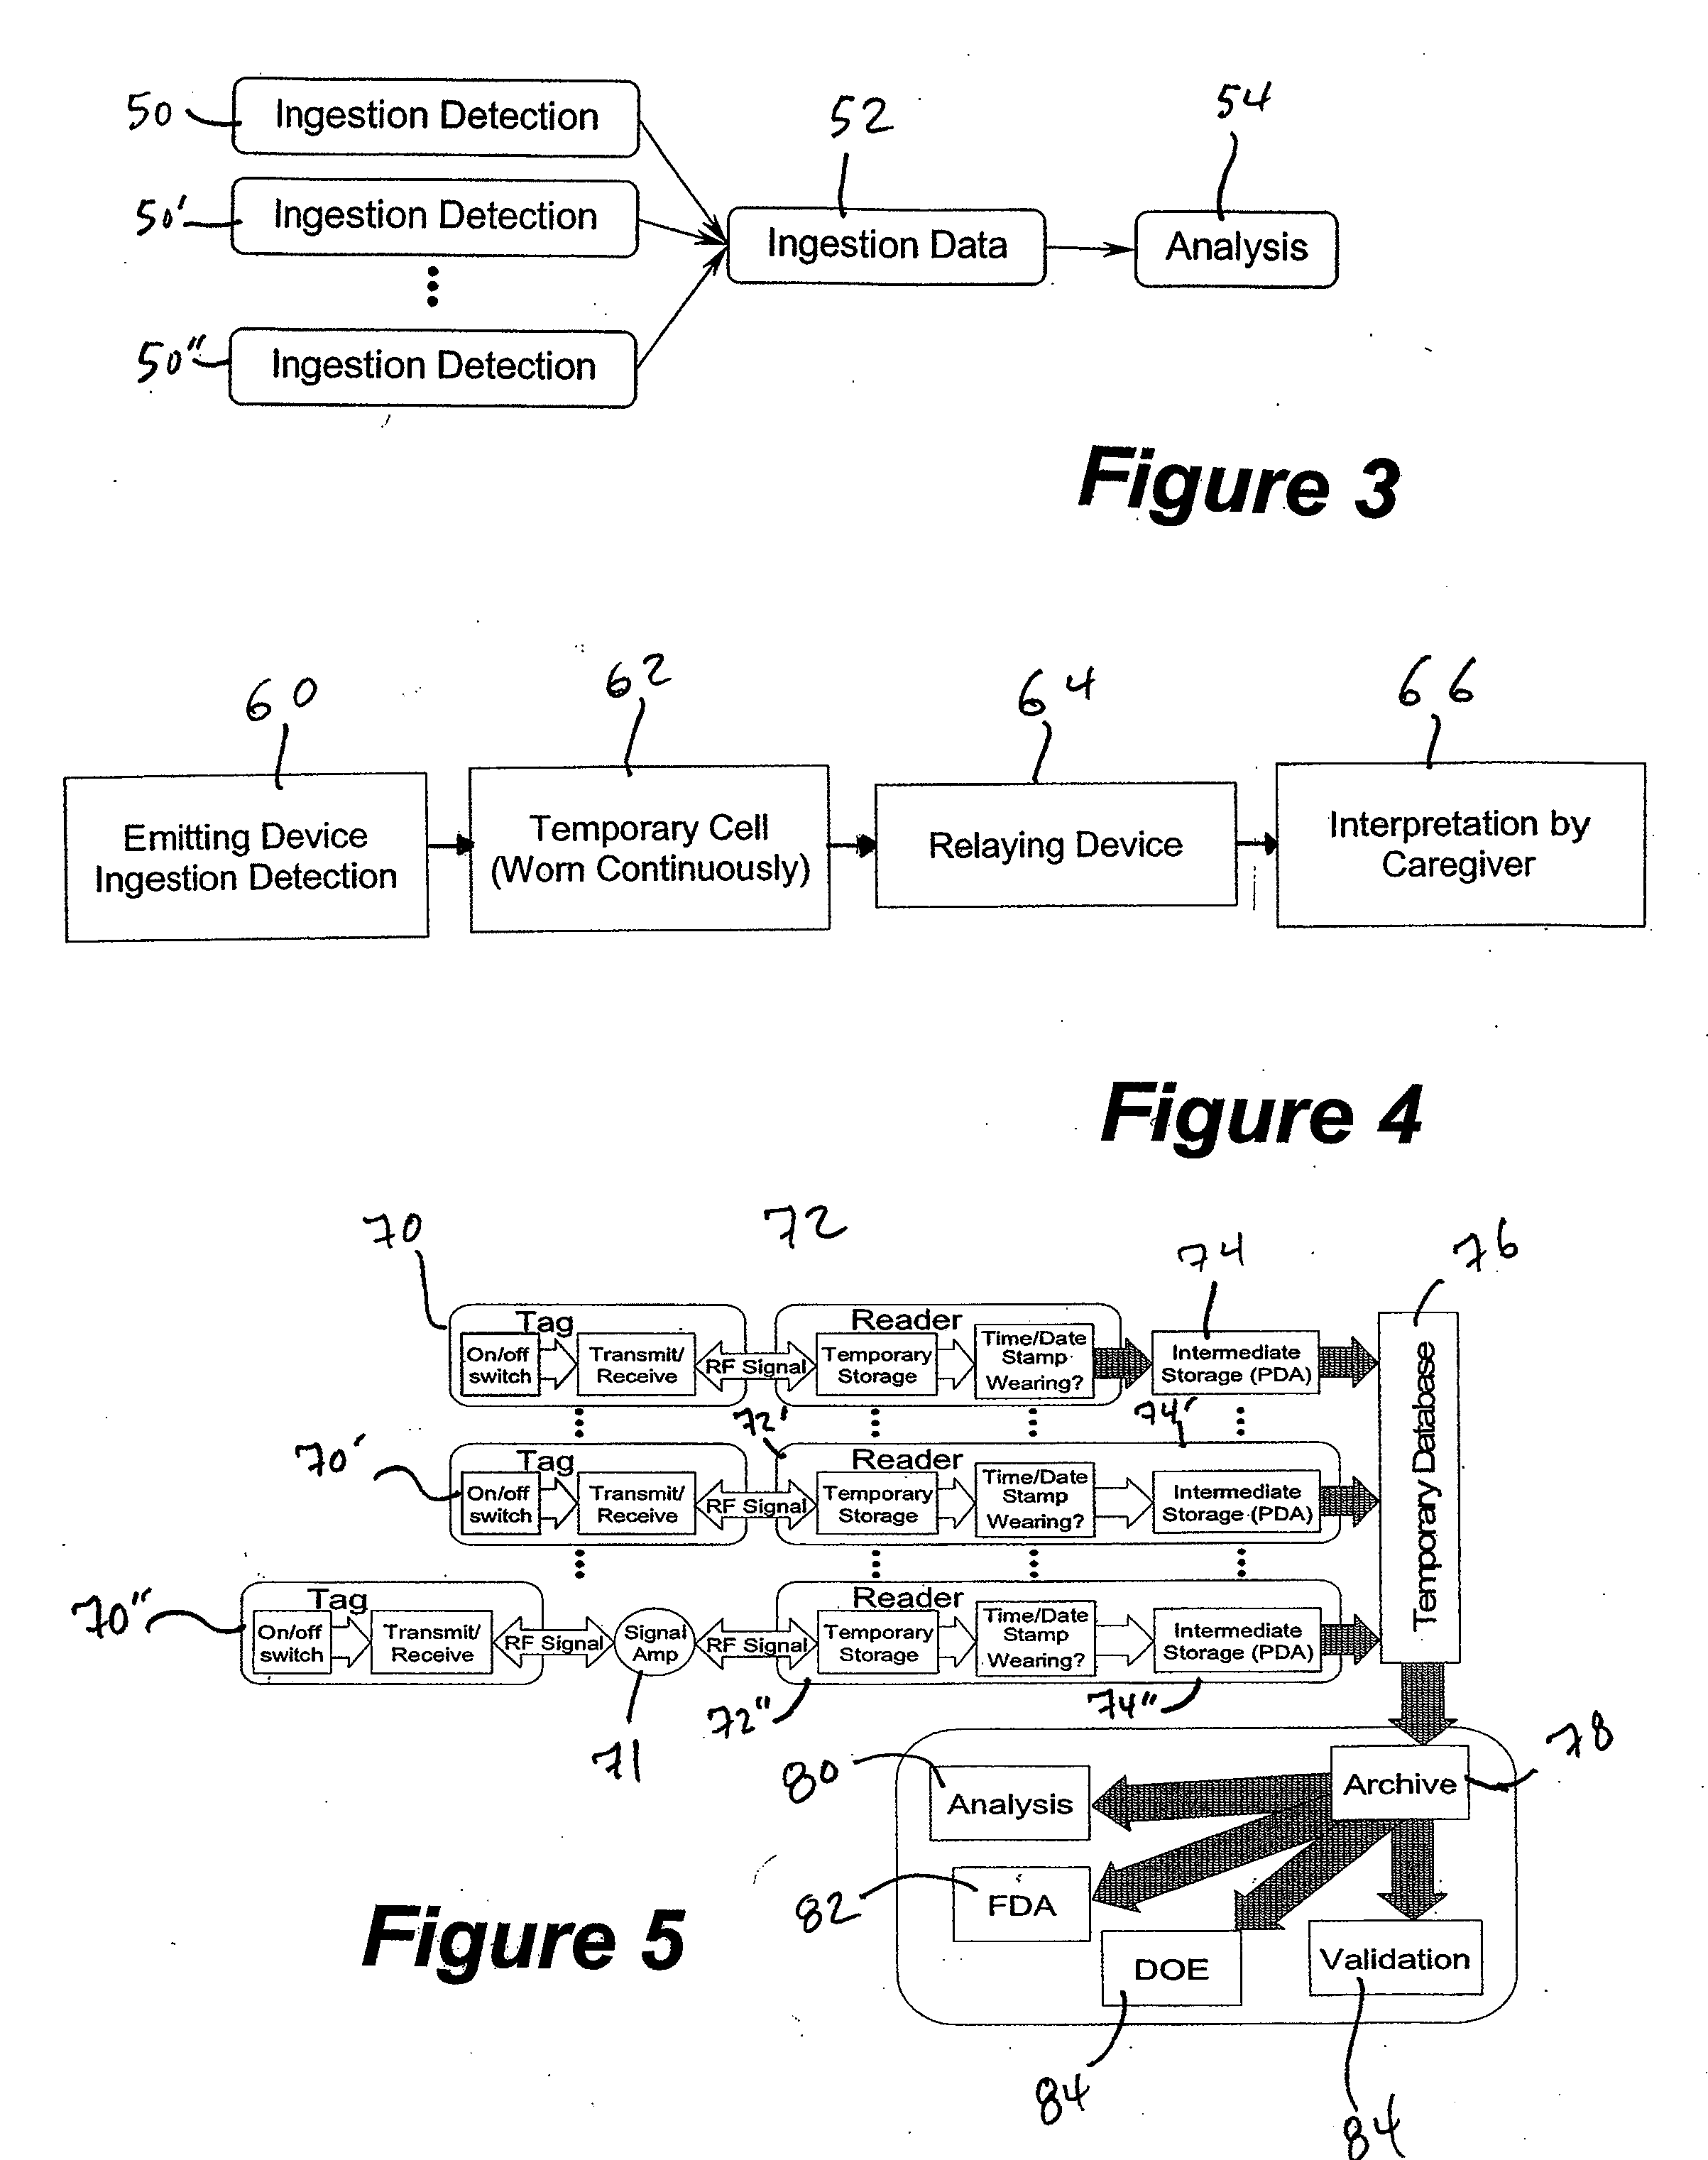 Method and system for monitoring and analyzing compliance with internal dosing regimen